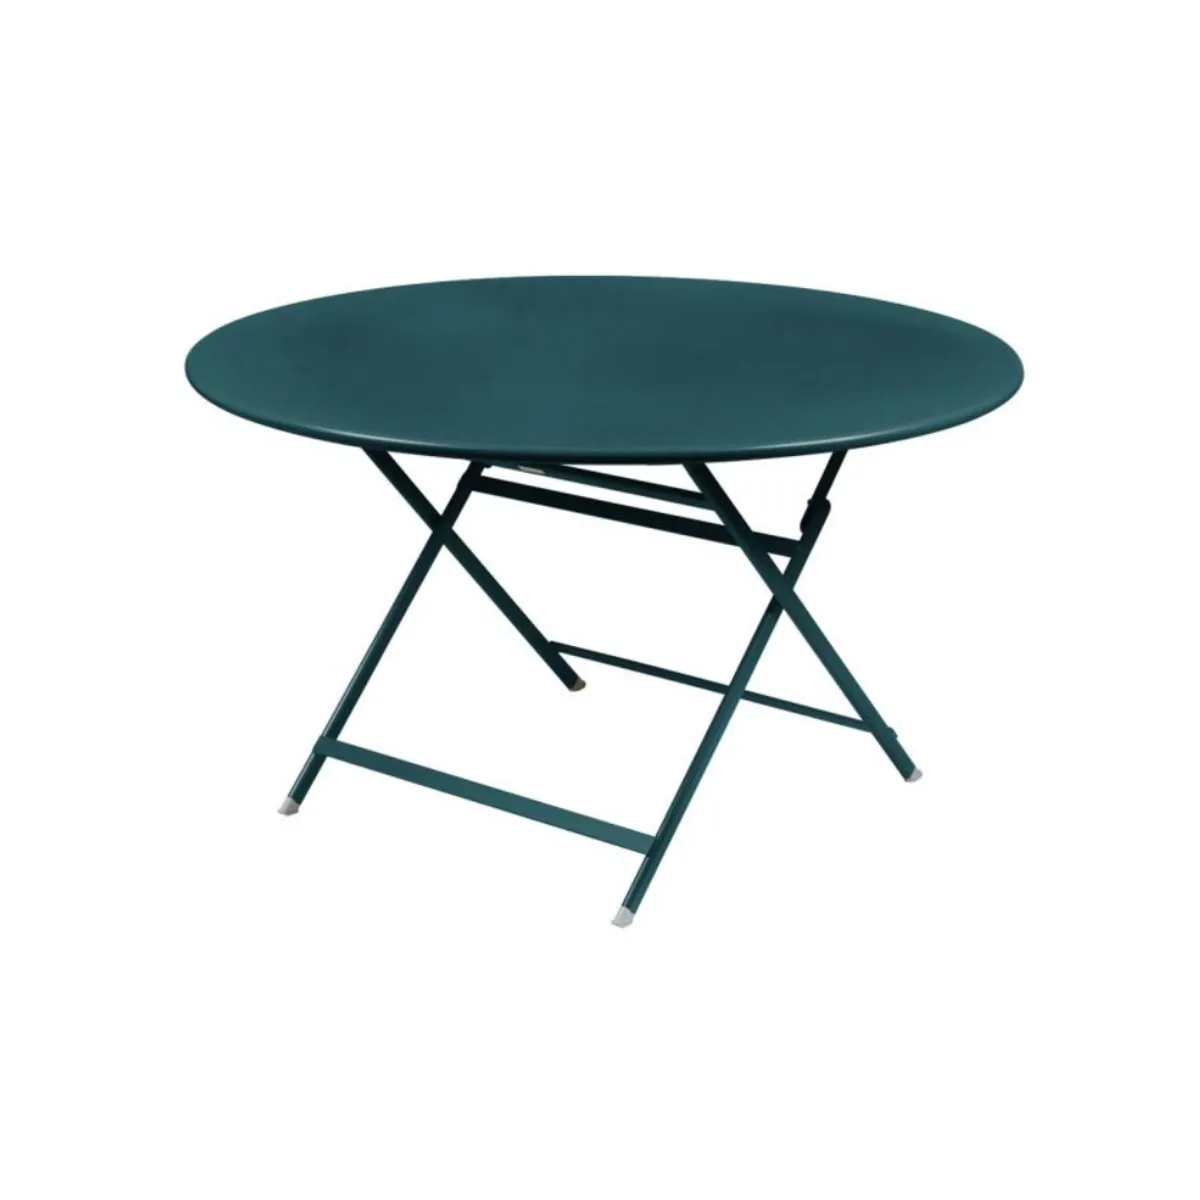 Caractere round folding table 1